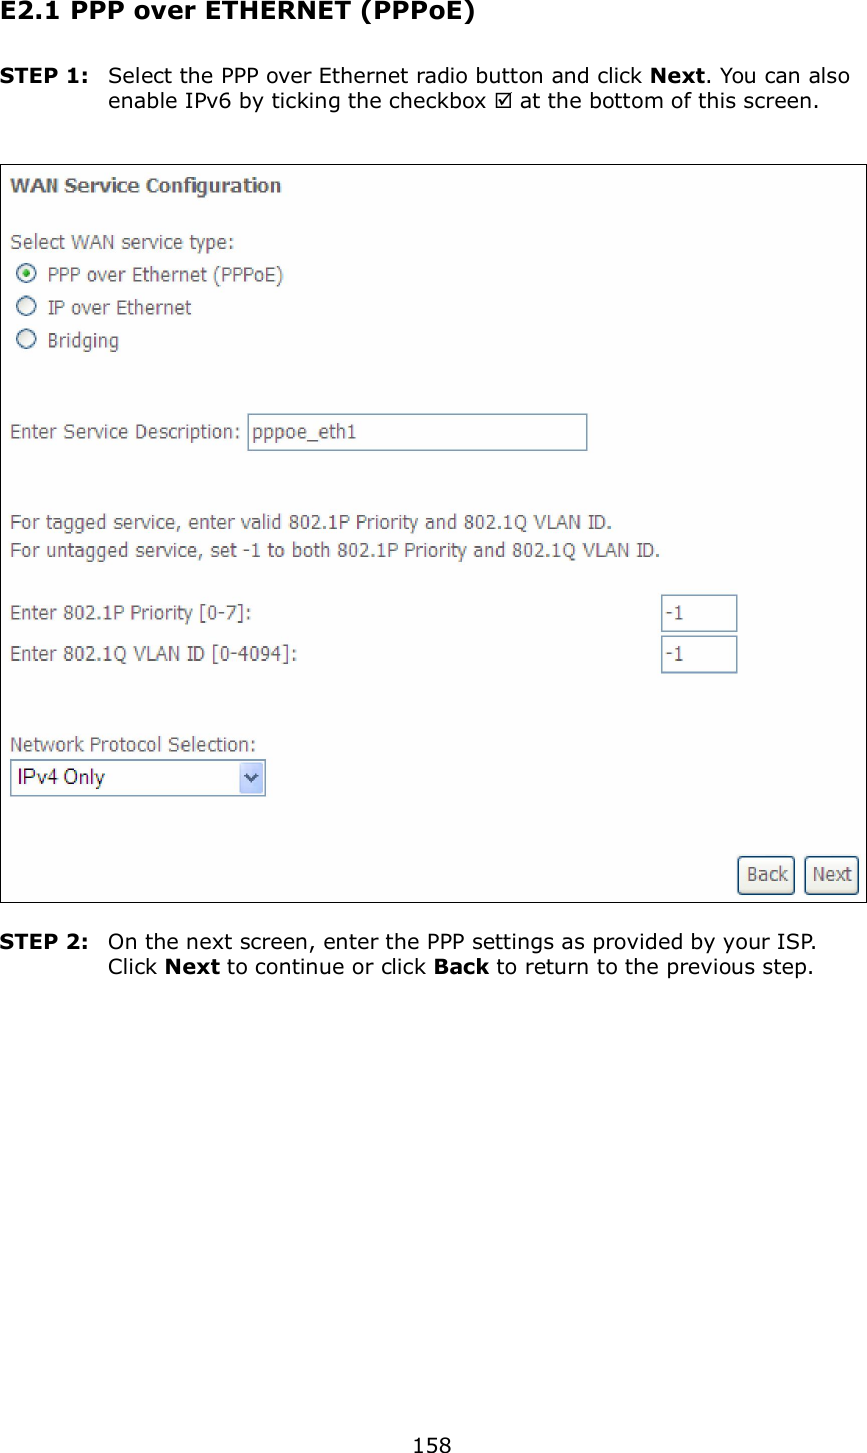  158 E2.1 PPP over ETHERNET (PPPoE) STEP 1:  Select the PPP over Ethernet radio button and click Next. You can also enable IPv6 by ticking the checkbox  at the bottom of this screen.     STEP 2:  On the next screen, enter the PPP settings as provided by your ISP.   Click Next to continue or click Back to return to the previous step.      